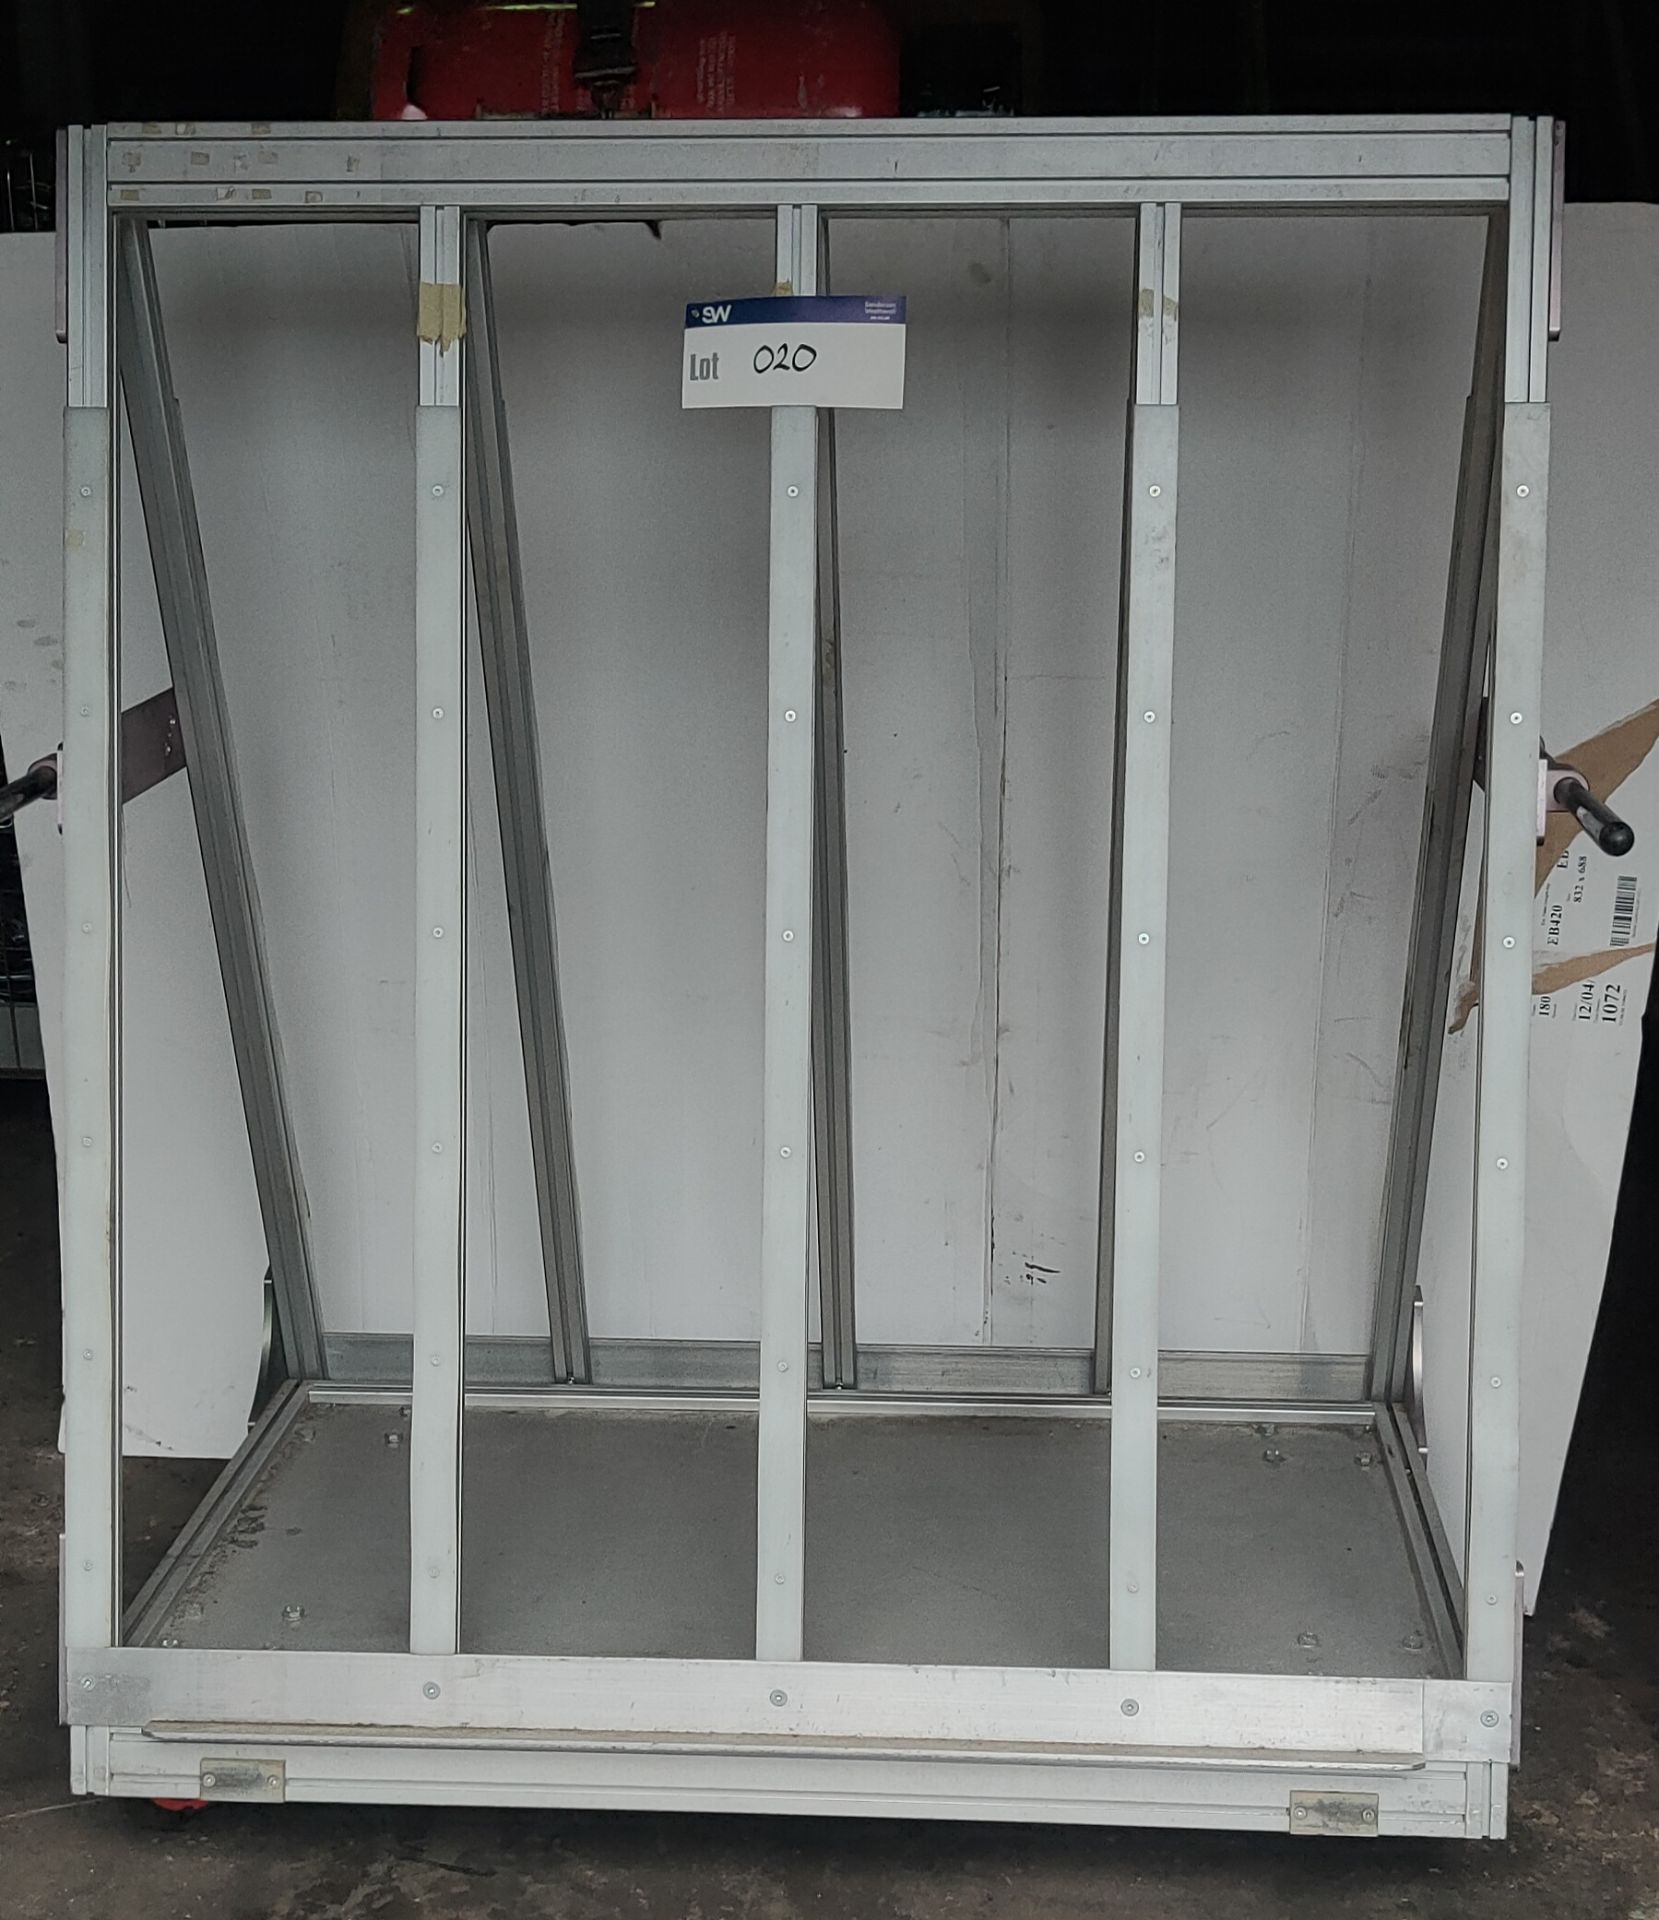 Aluminium Glass Transporter, approx. 165cm x 140cm x 85cm, loading free of charge - yes (vendors - Image 2 of 2